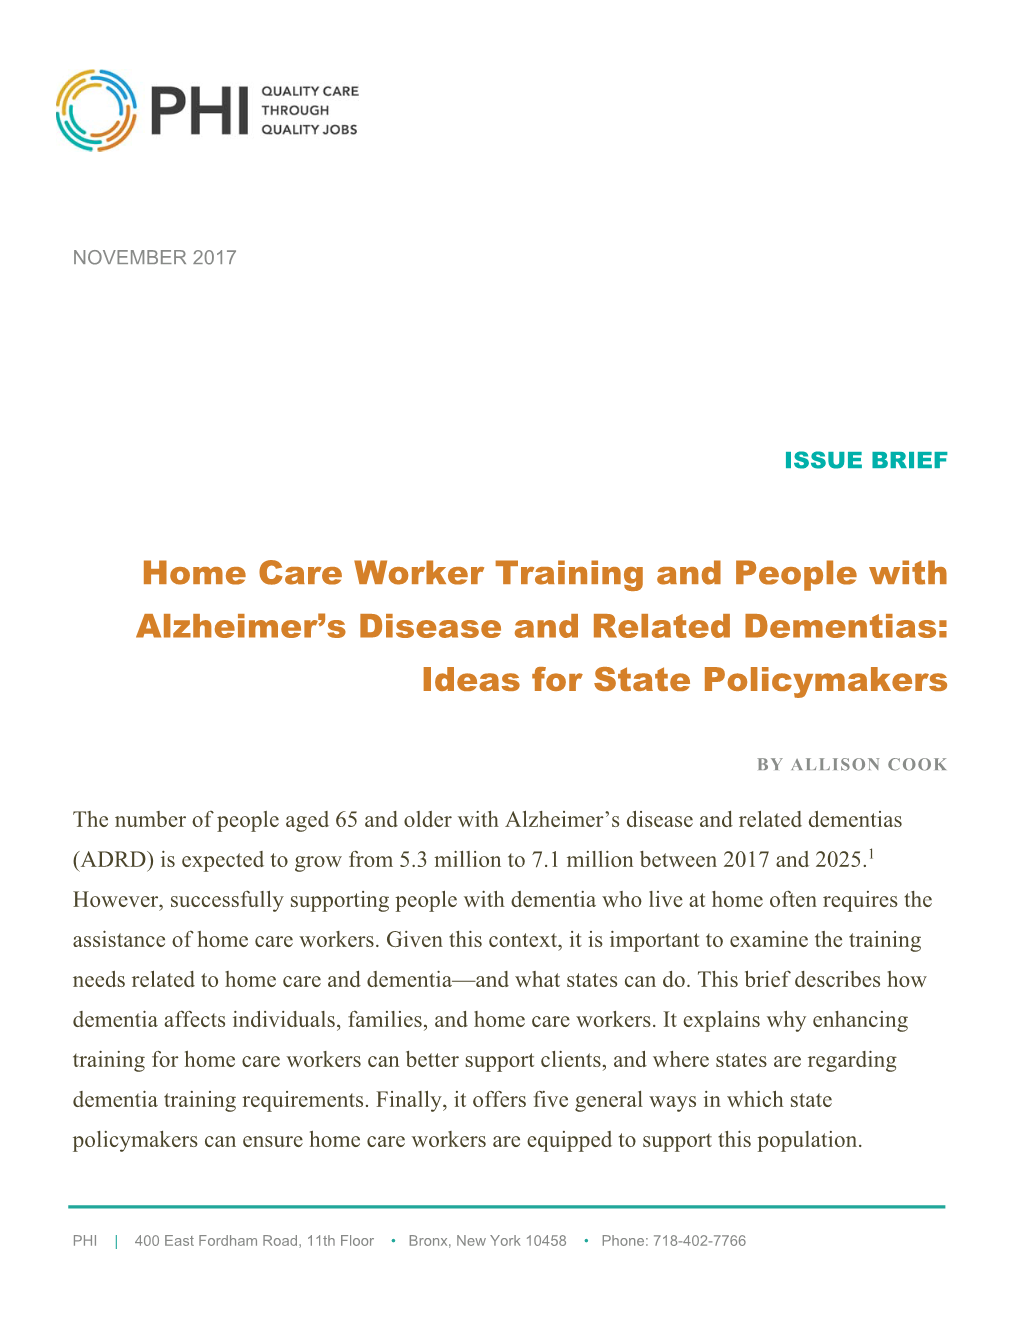 Home Care Worker Training and People with Alzheimer's